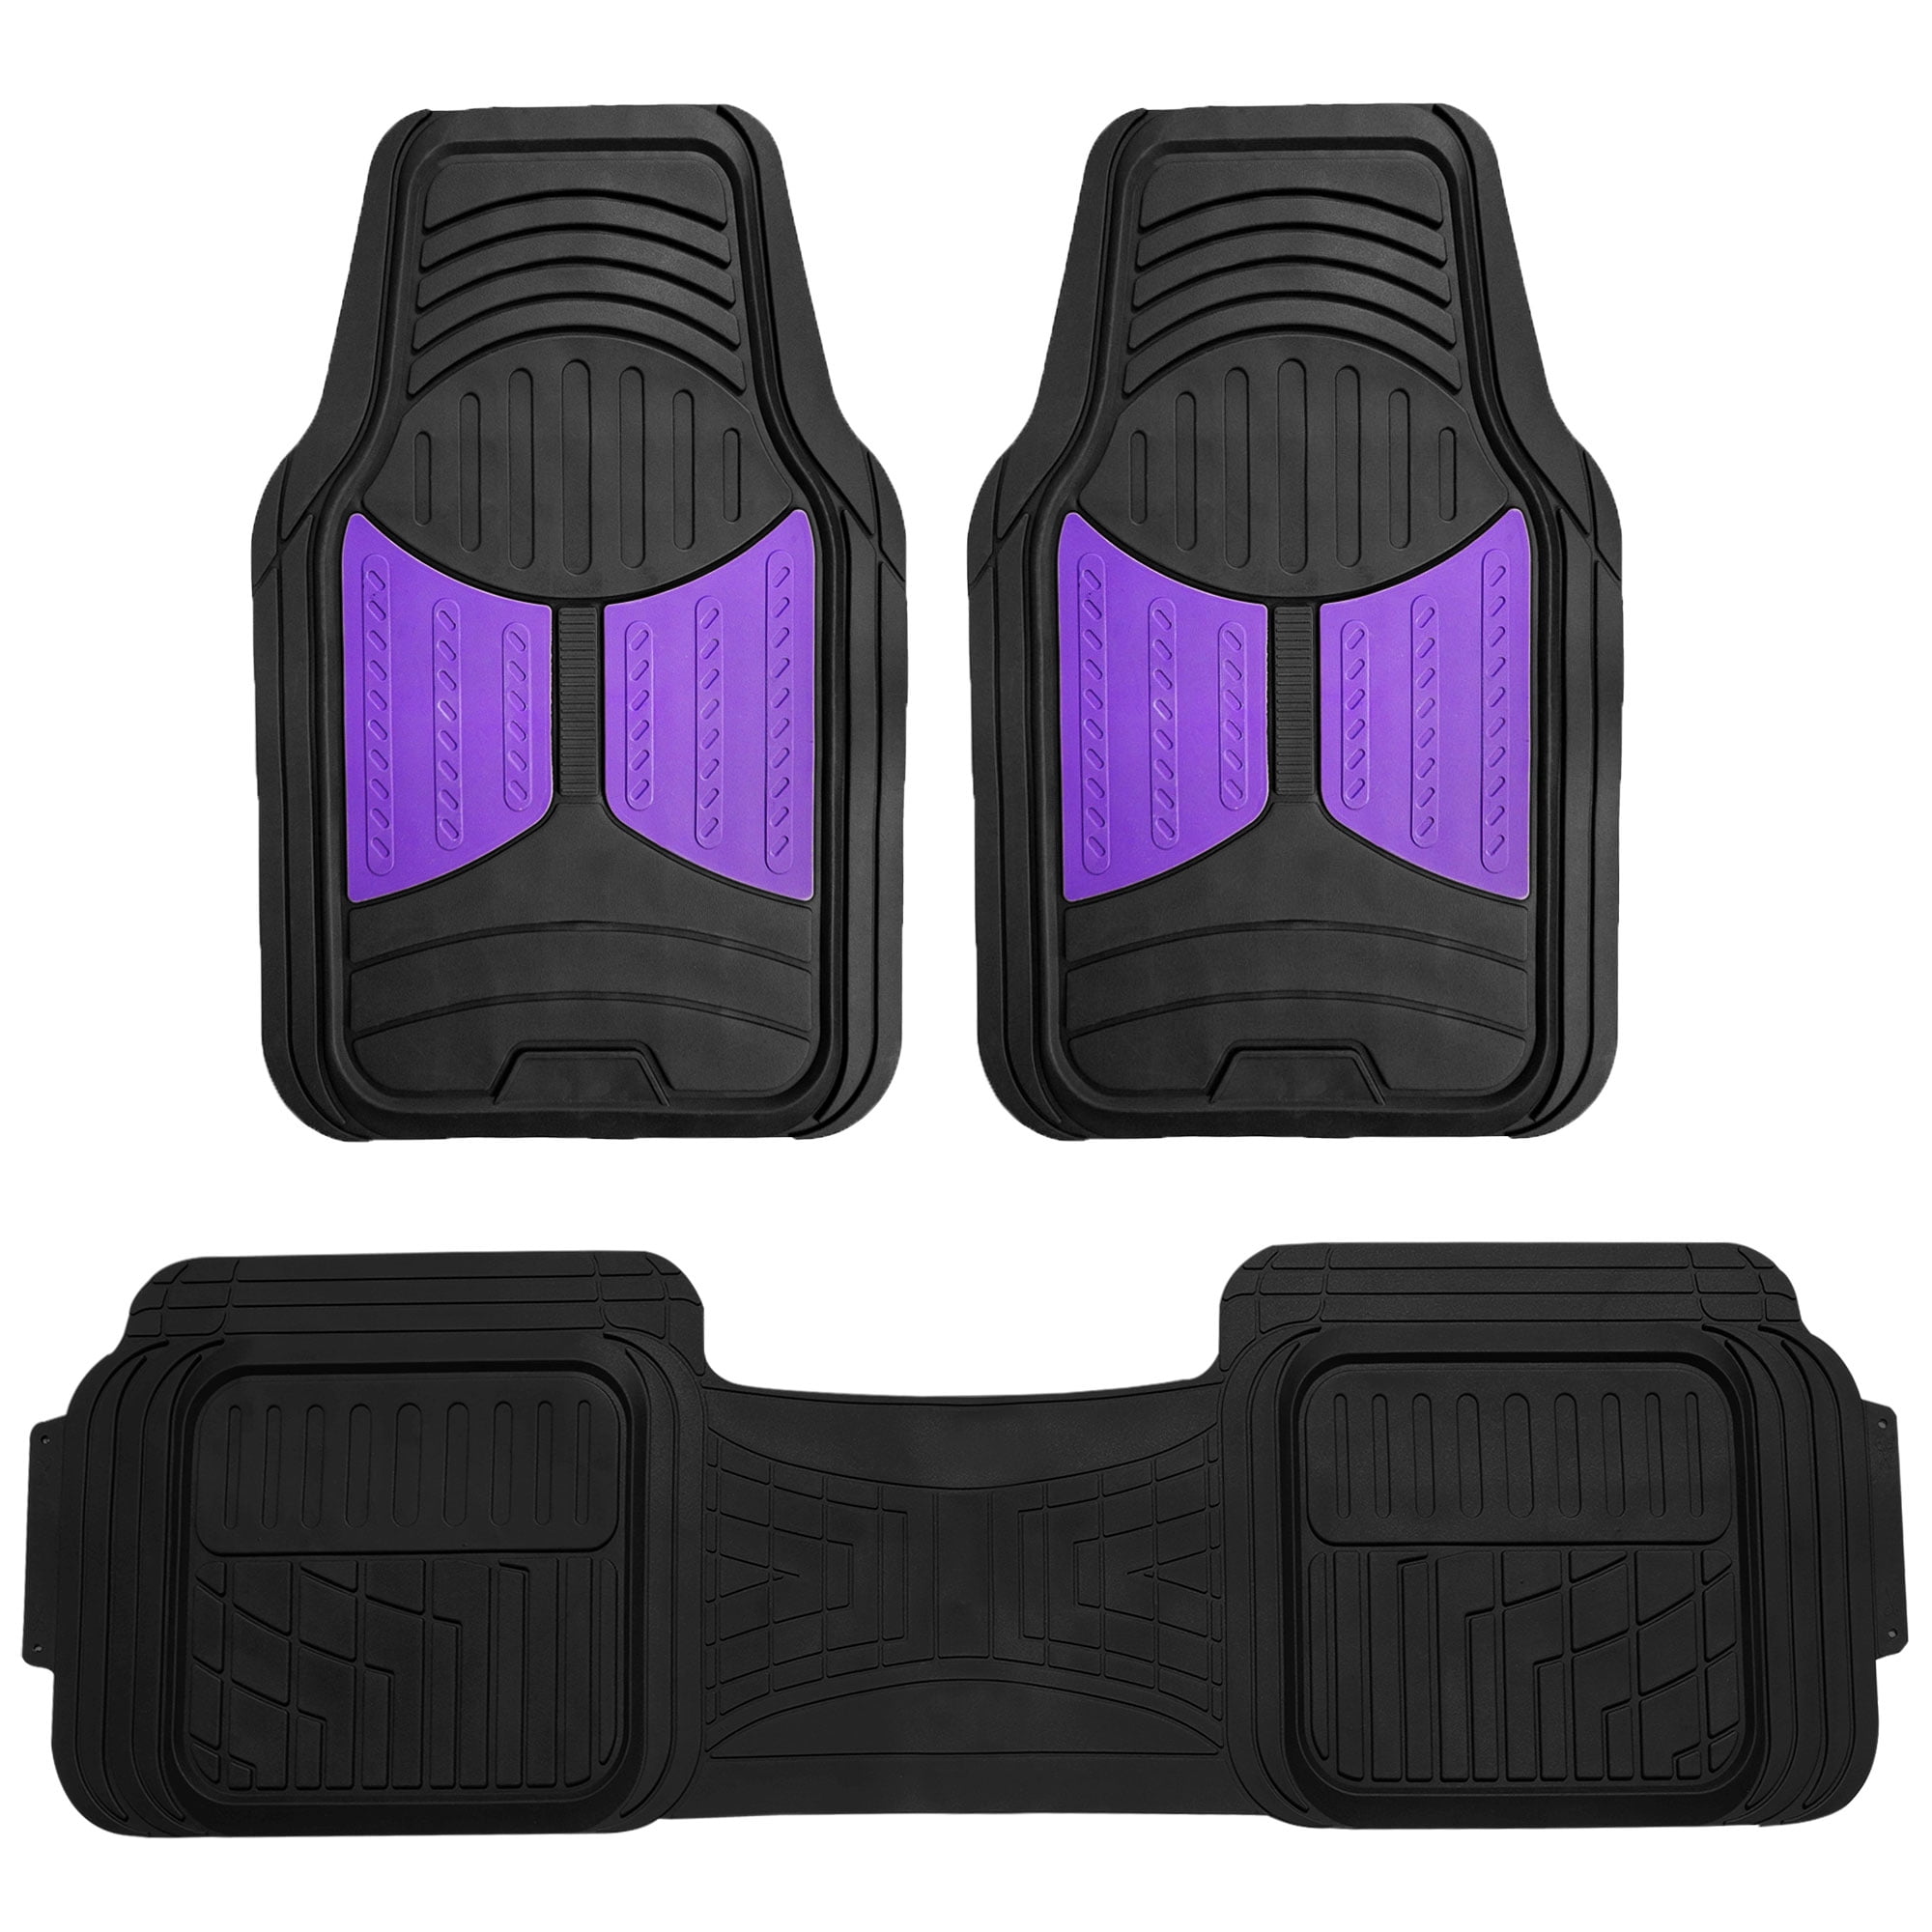 FH Group 2 Tone Color Floor Mats for Car SUV Van Auto All Weather Heavy Duty Universal Mats 8